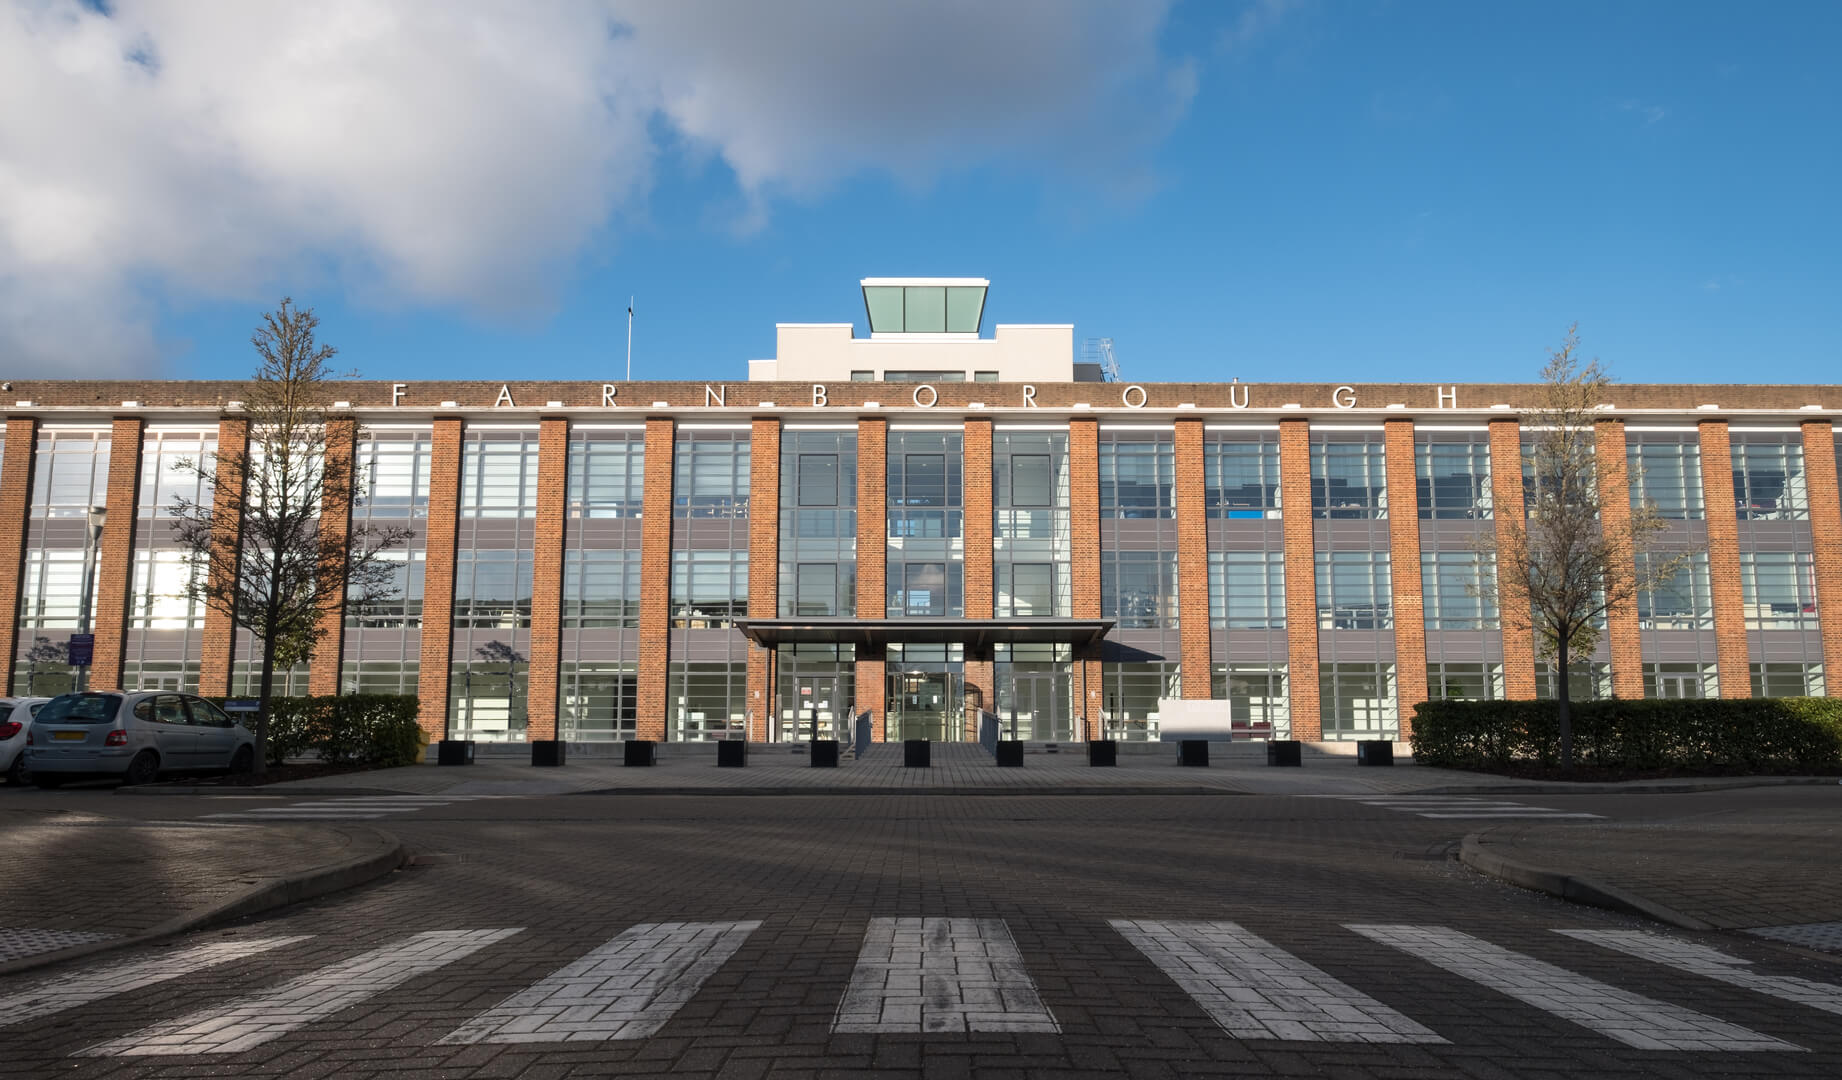 The Hub, serviced offices in a renovated art deco style building on Farnborough Business Park, Hampshire UK. The building was once used as an airport departure lounge.